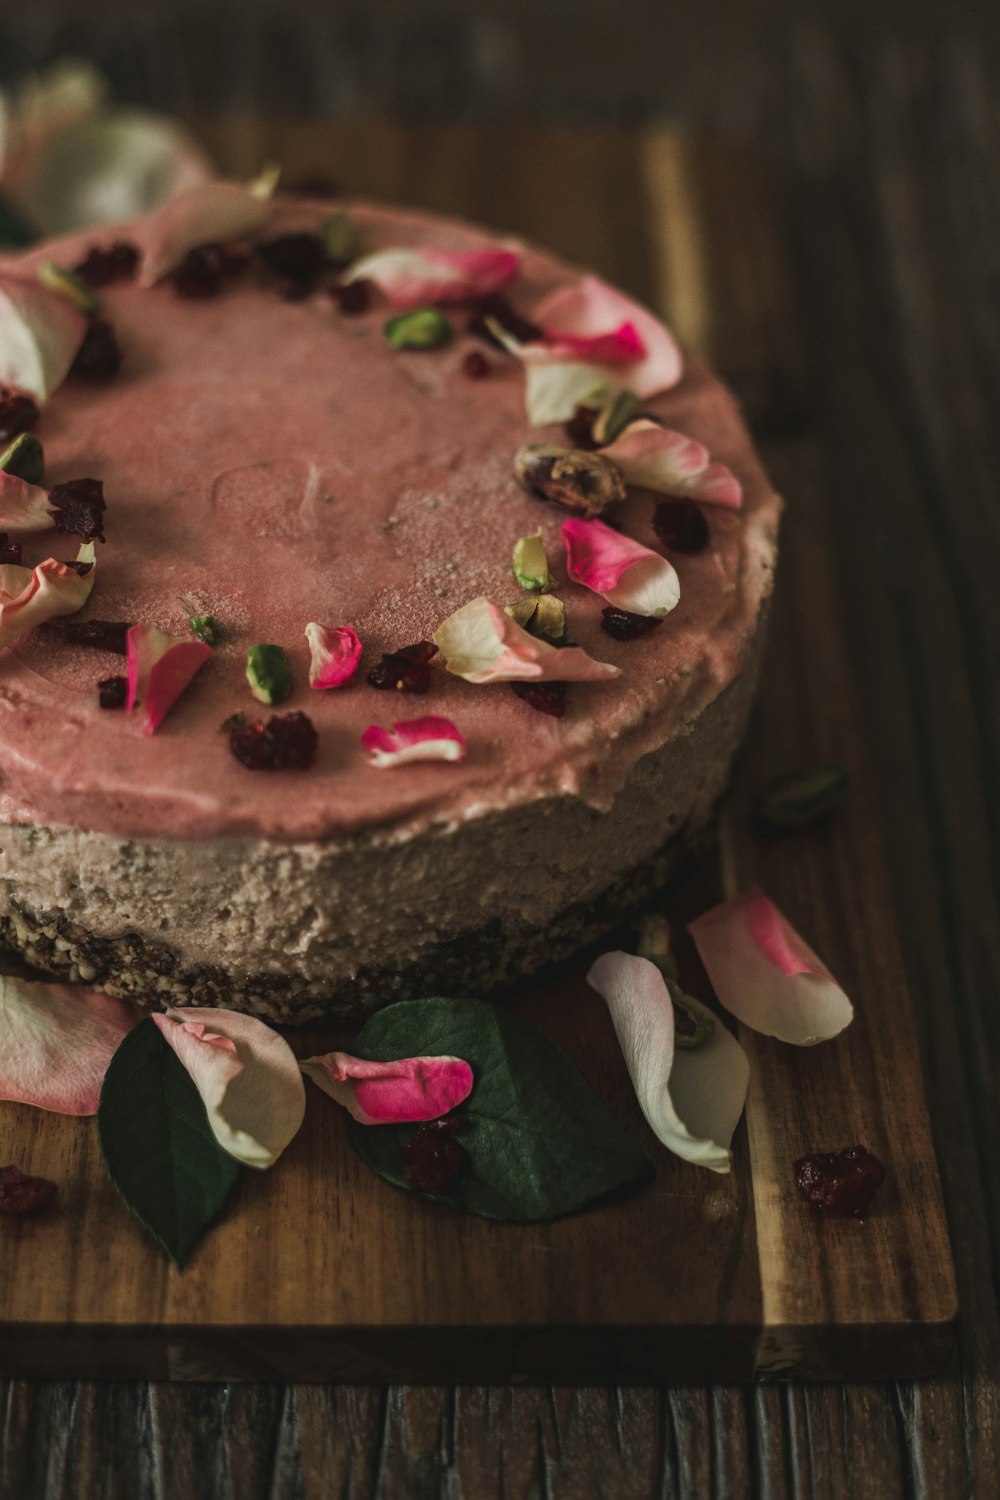 a cake with pink frosting and flowers on a cutting board